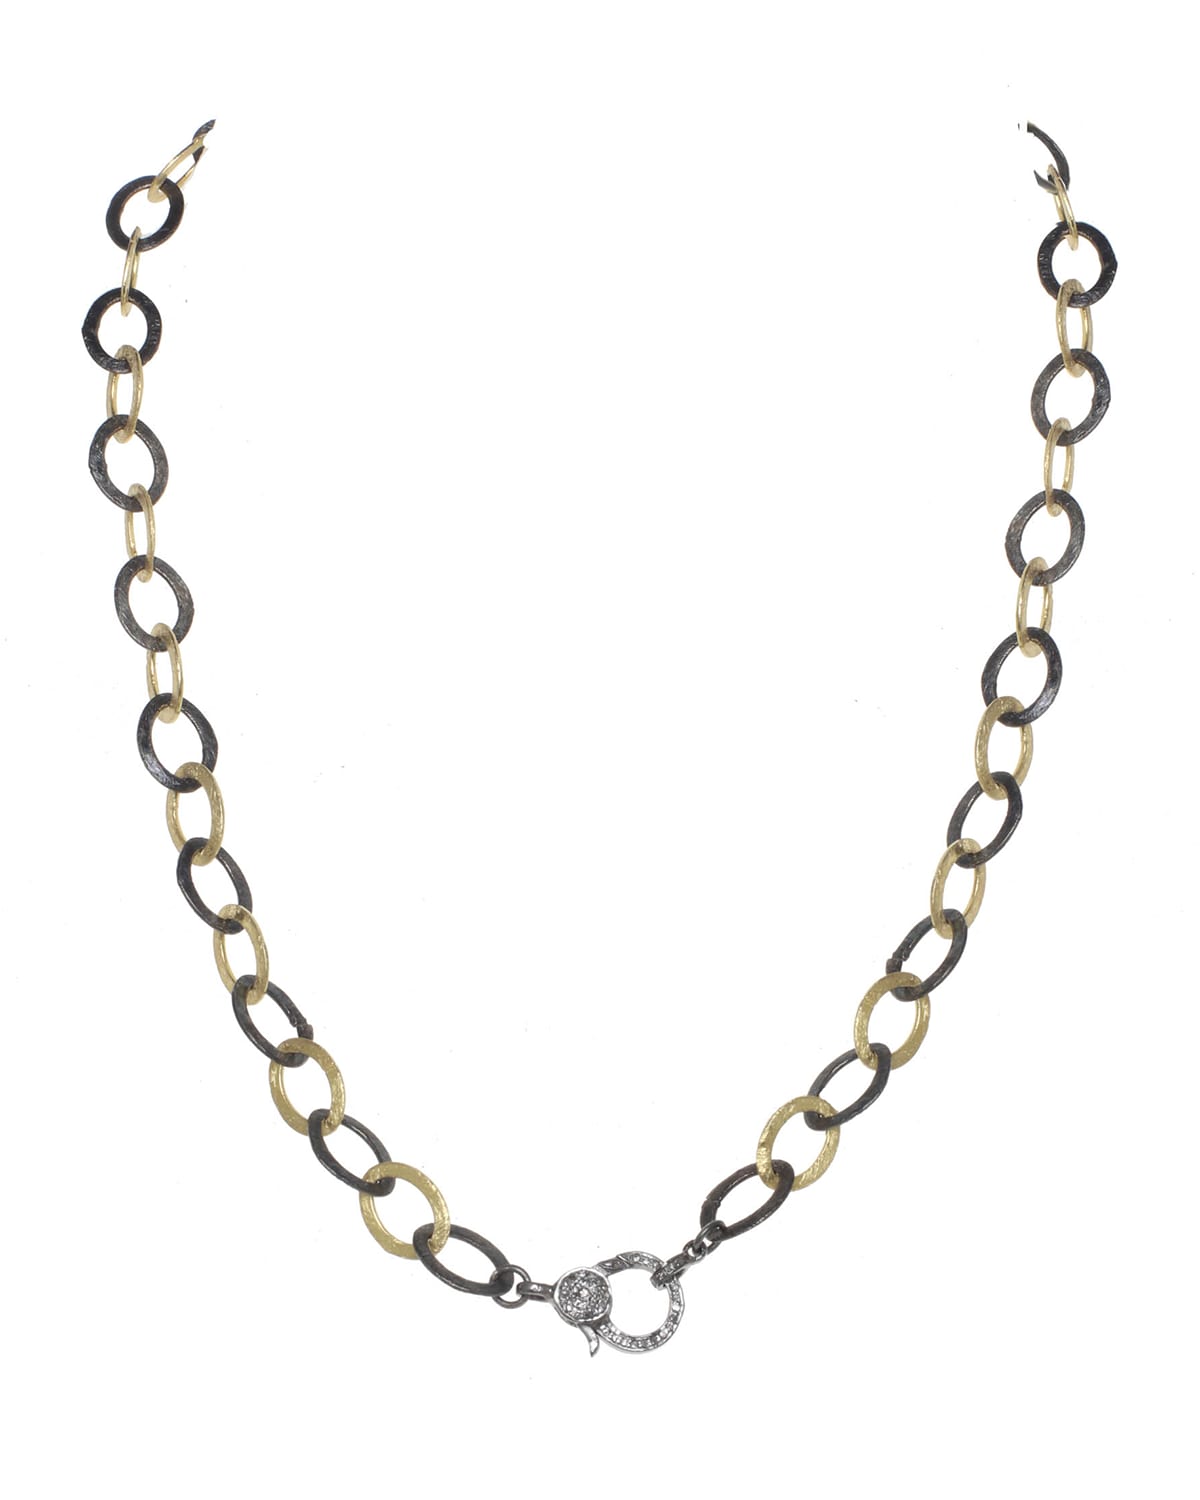 Matte Vermeil and Sterling Silver Flat Chain Necklace with Diamond Clasp